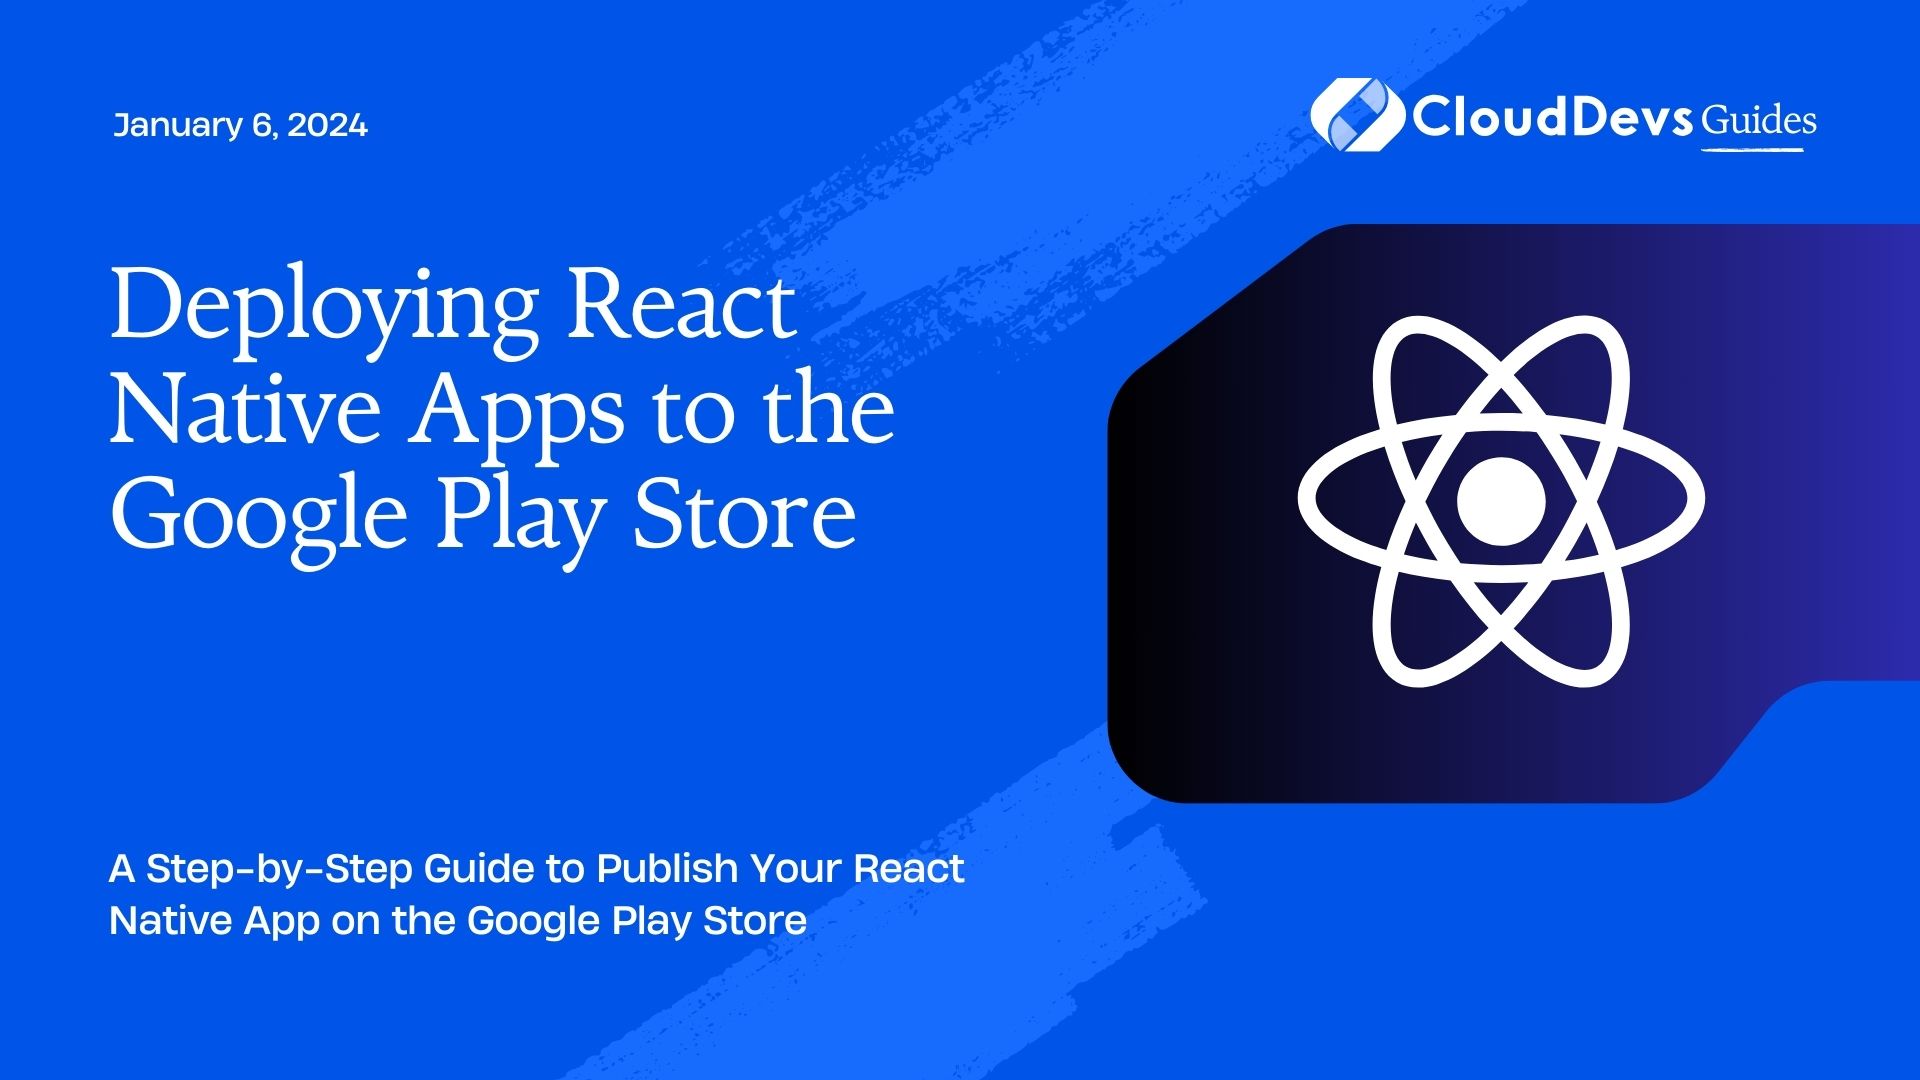 Deploying React Native Apps to the Google Play Store